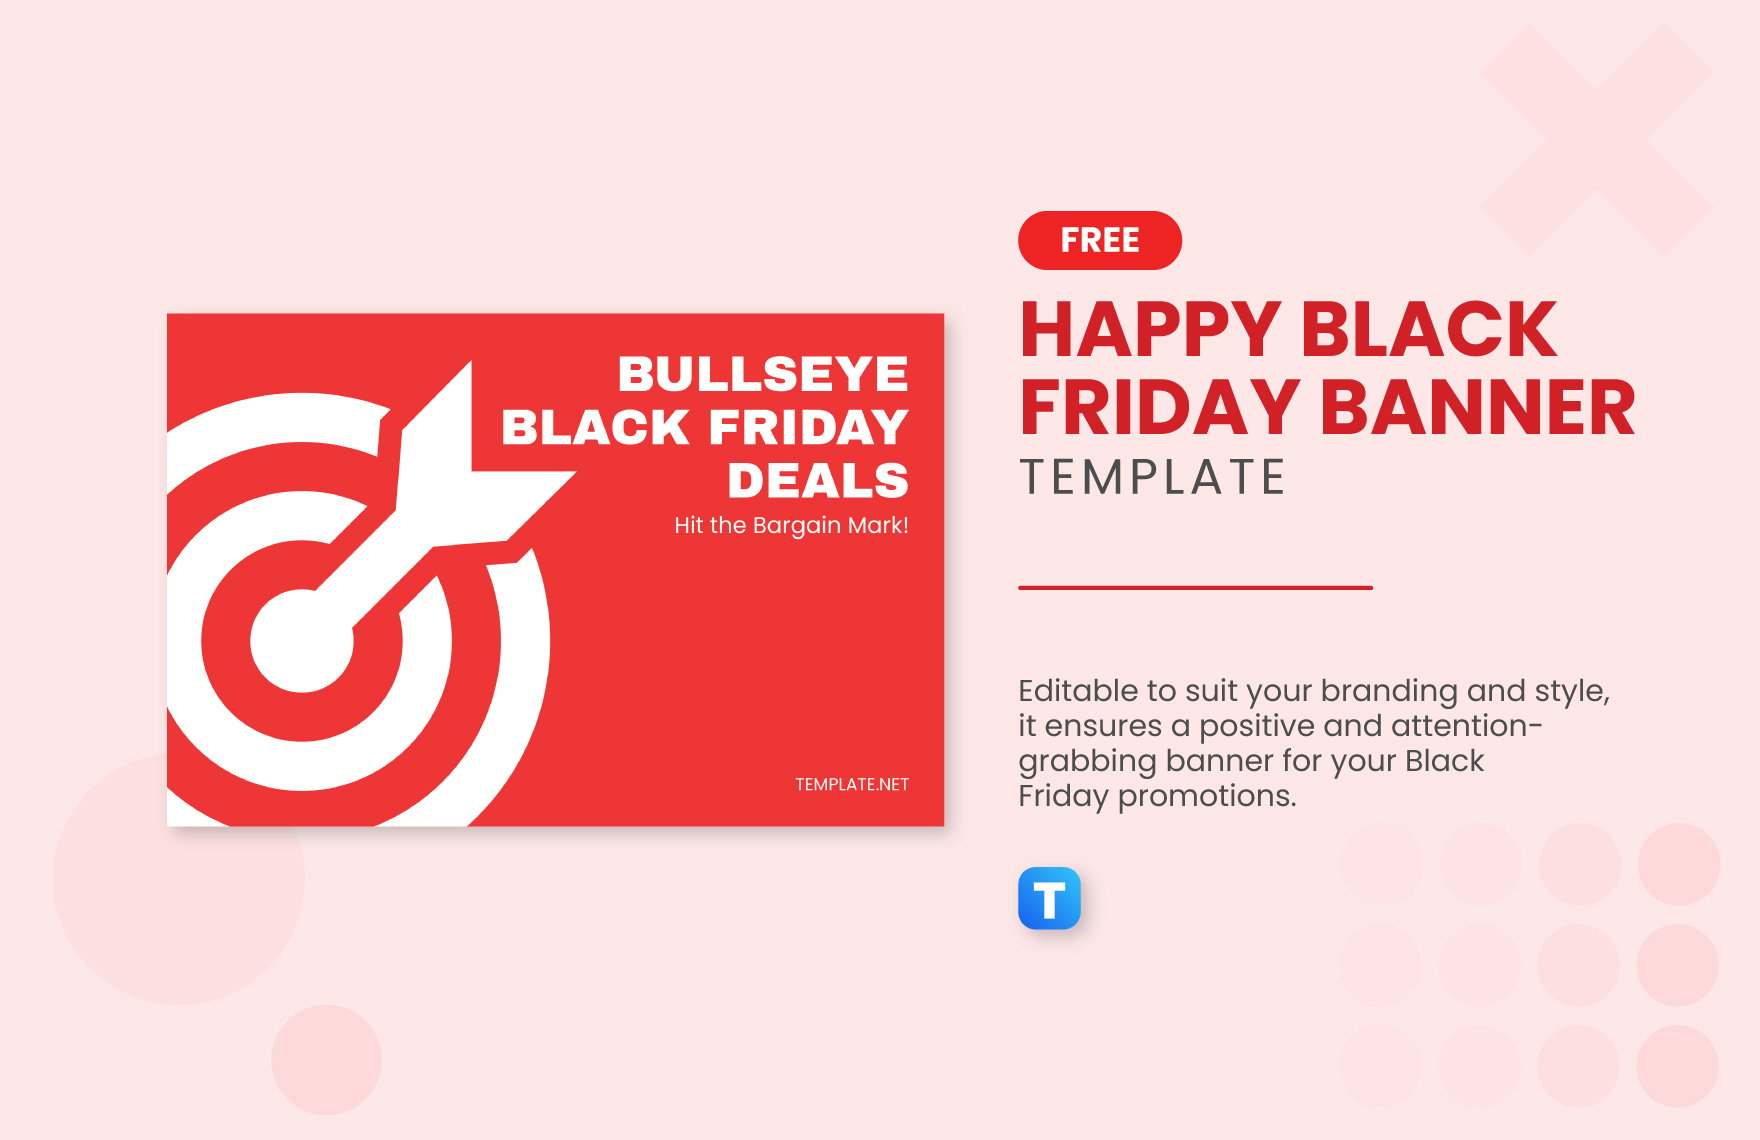 Free Happy Black Friday Banner Template